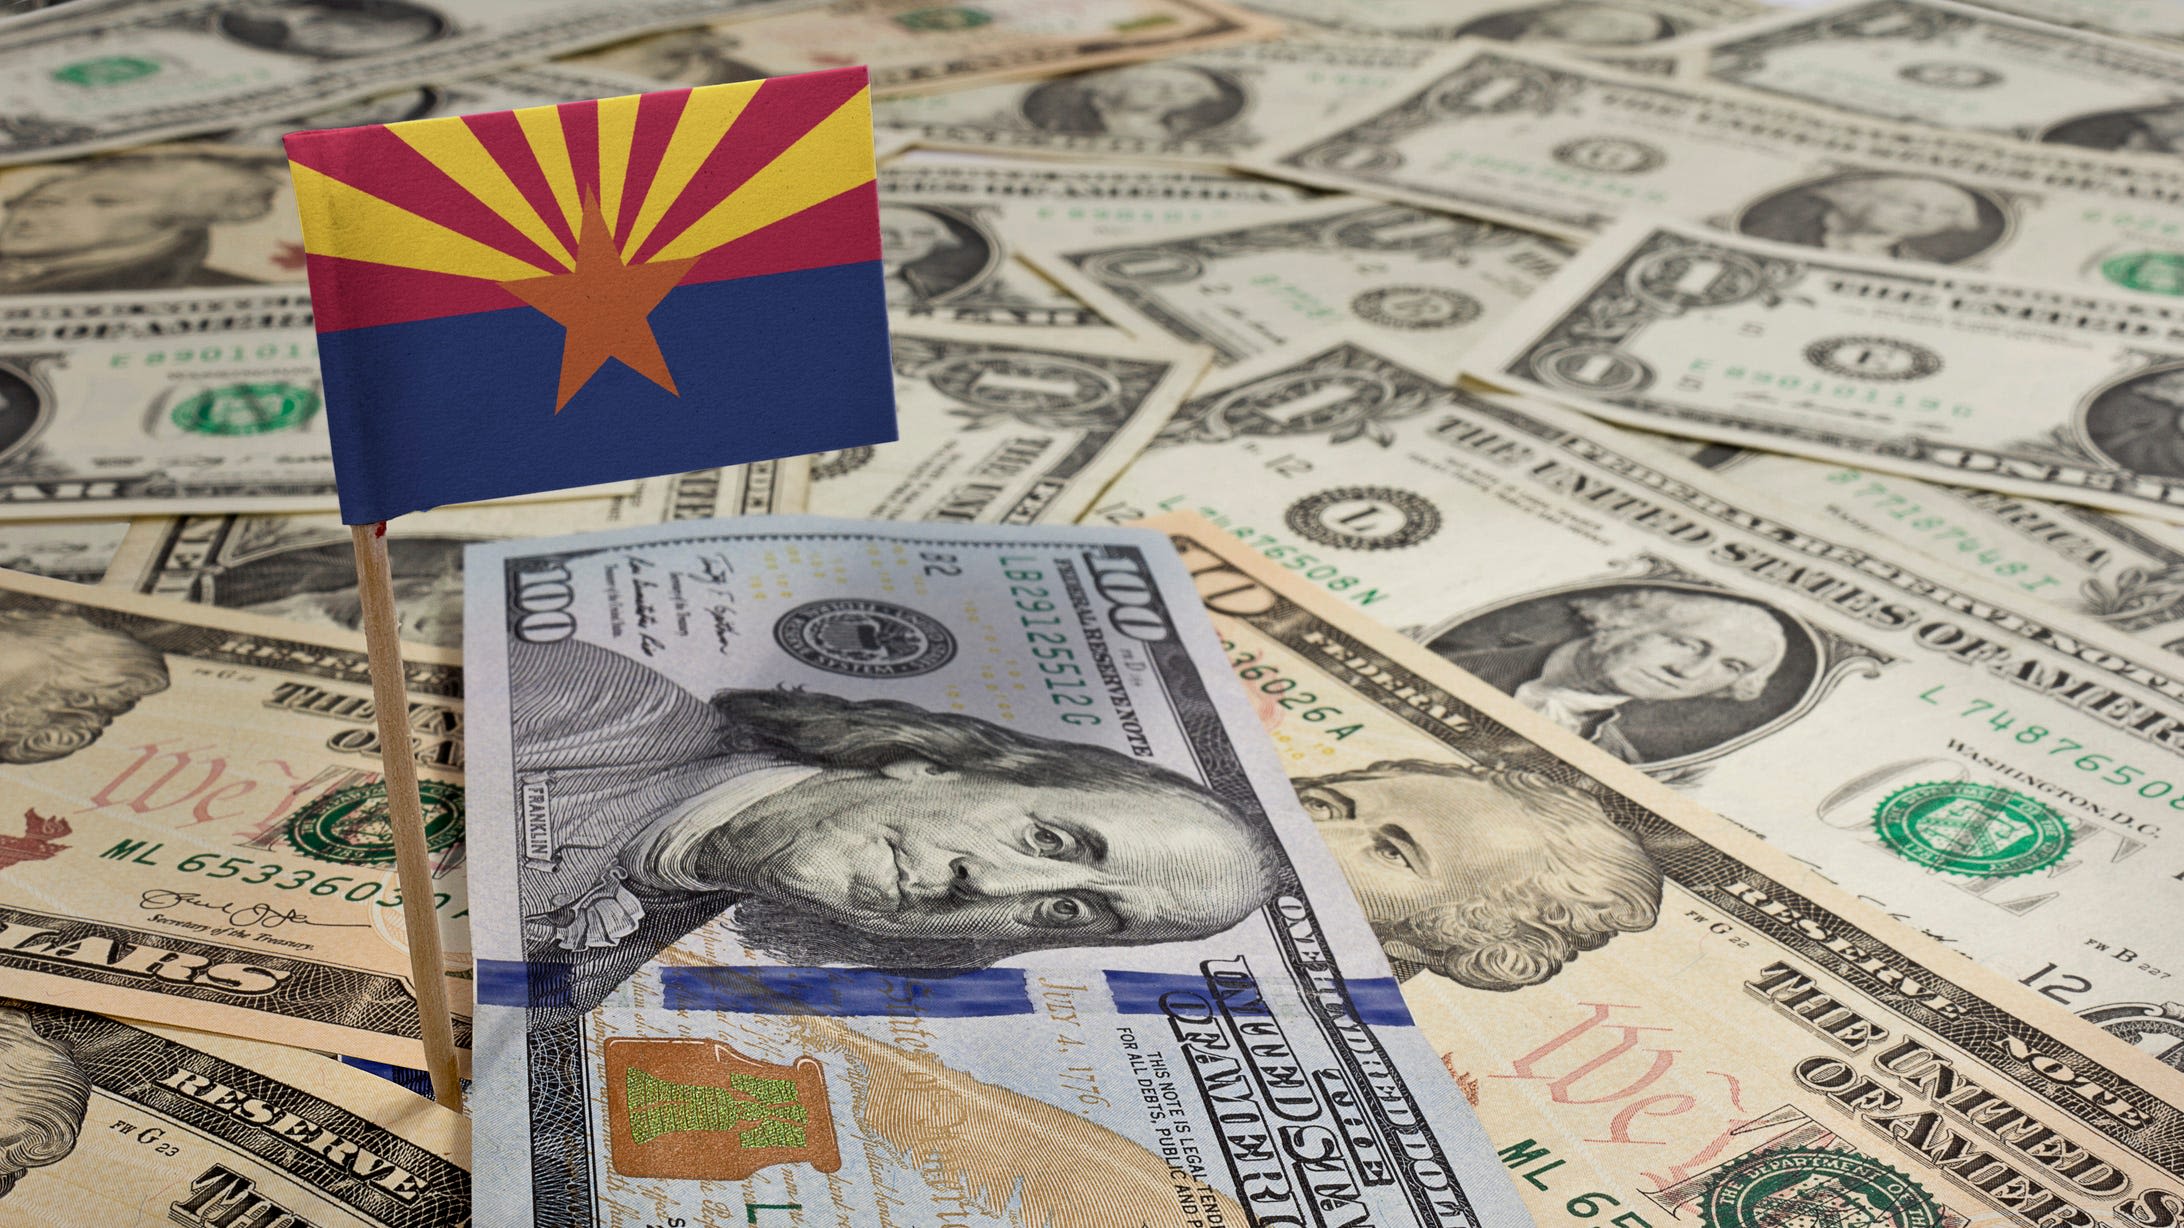 Scammers took billions in taxpayer money through biggest fraud in Arizona history. Here’s how